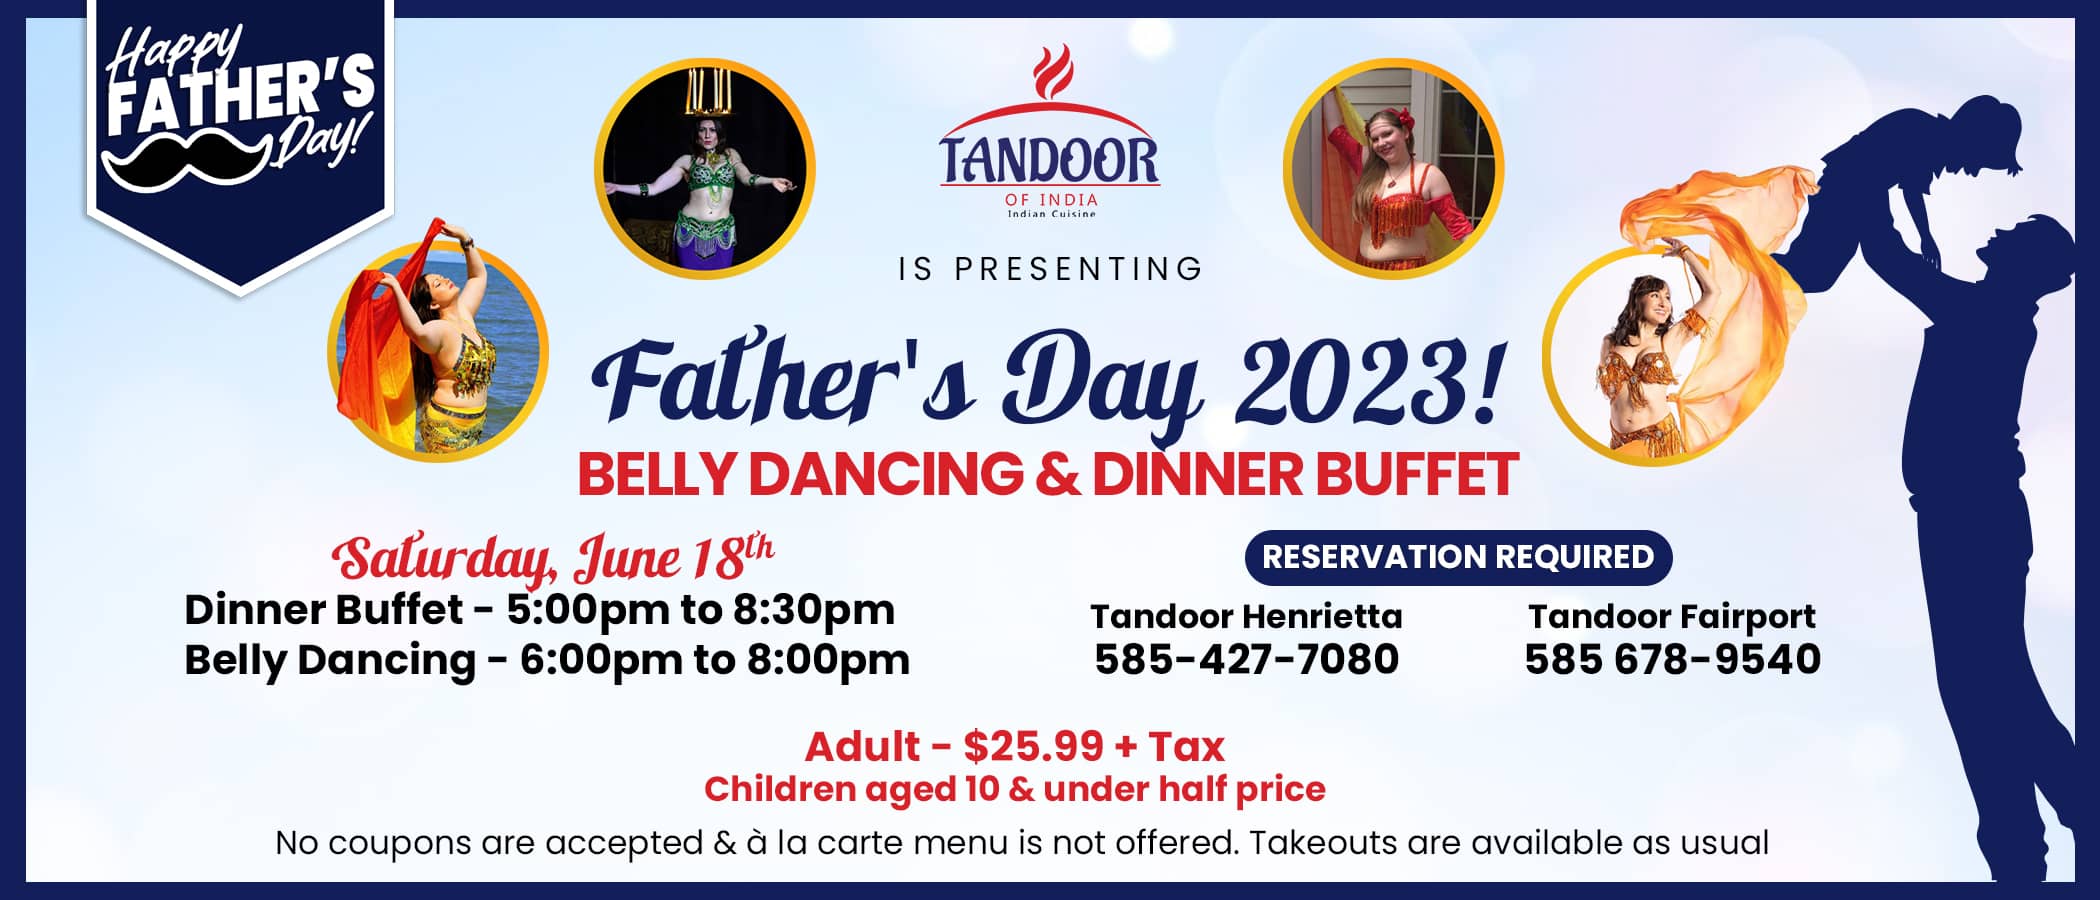 TANDOOR - FATHER'S DAY 2023 BANNER (1)